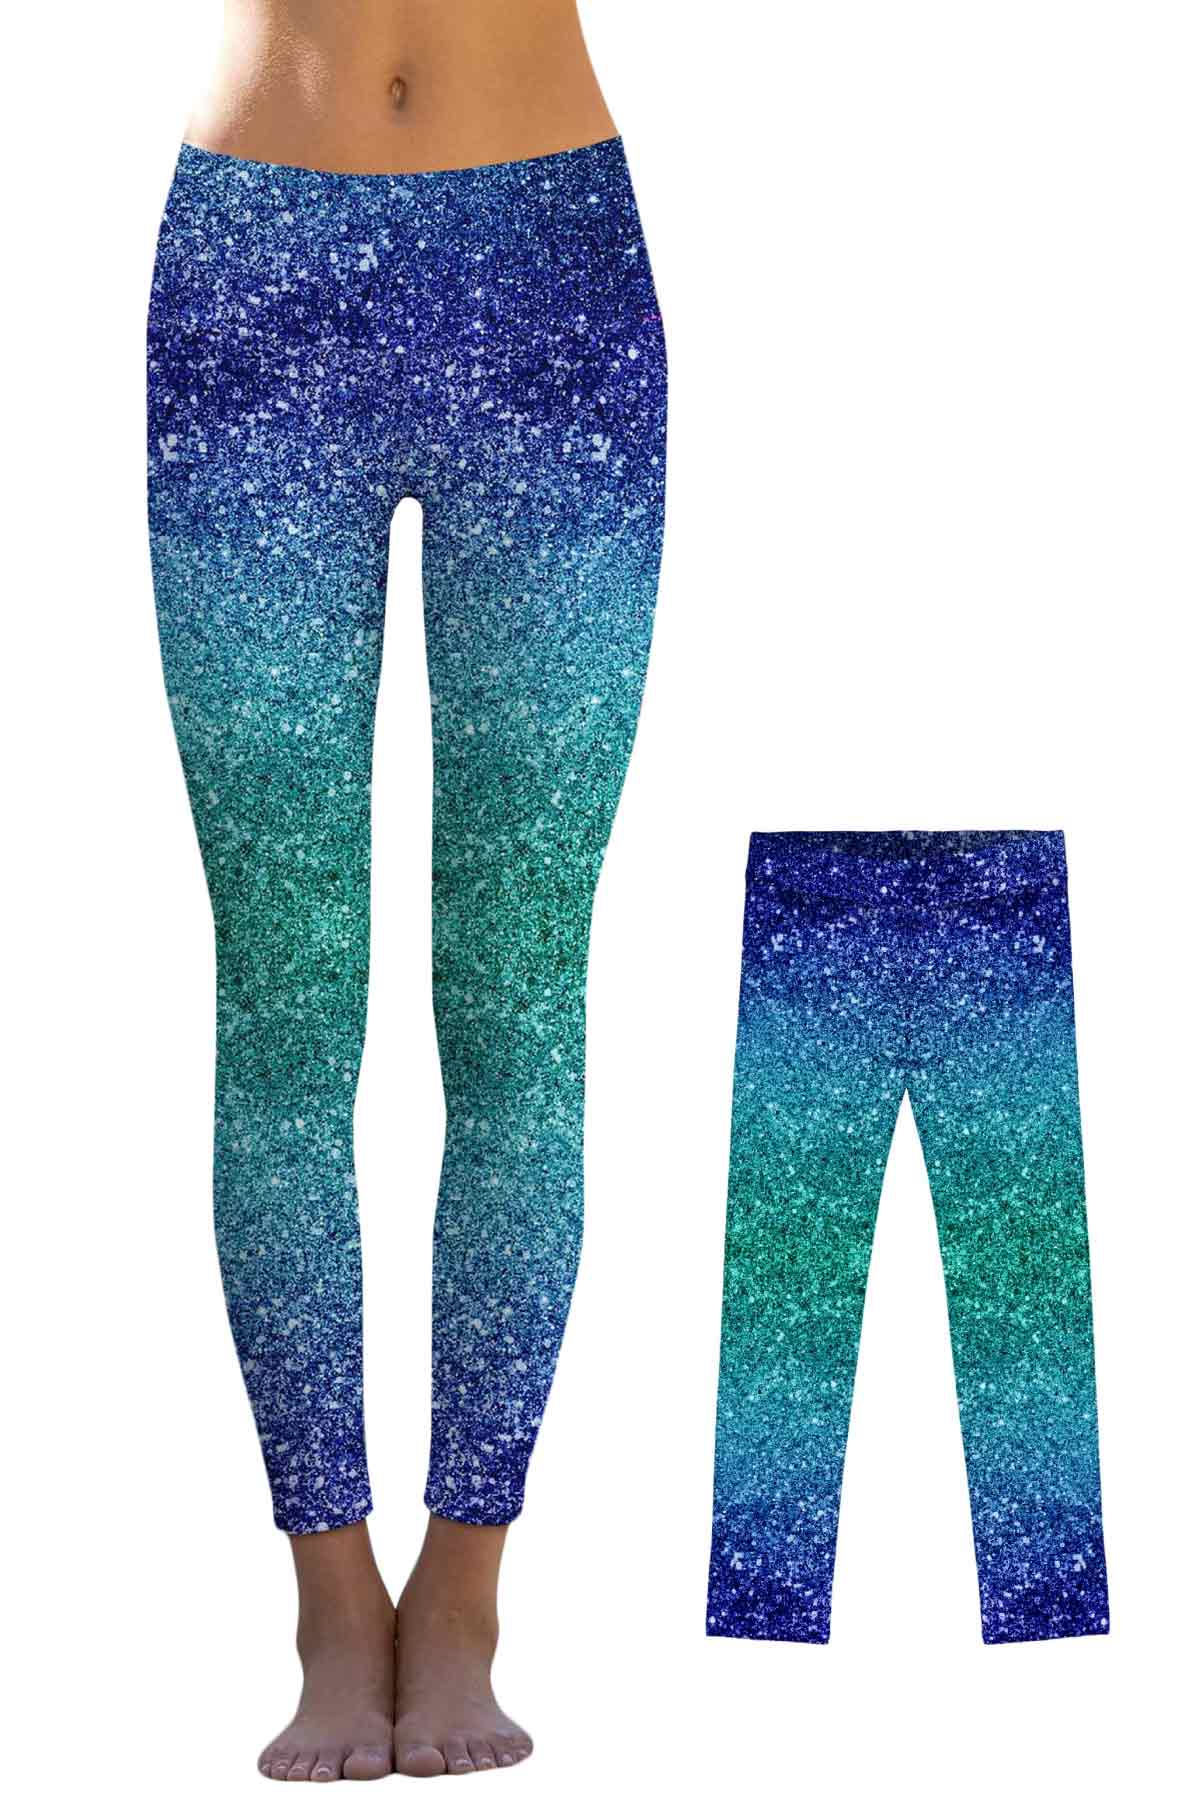 Ocean Drive Lucy Blue Glitter Printed Leggings - Mommy and Me - Pineapple Clothing